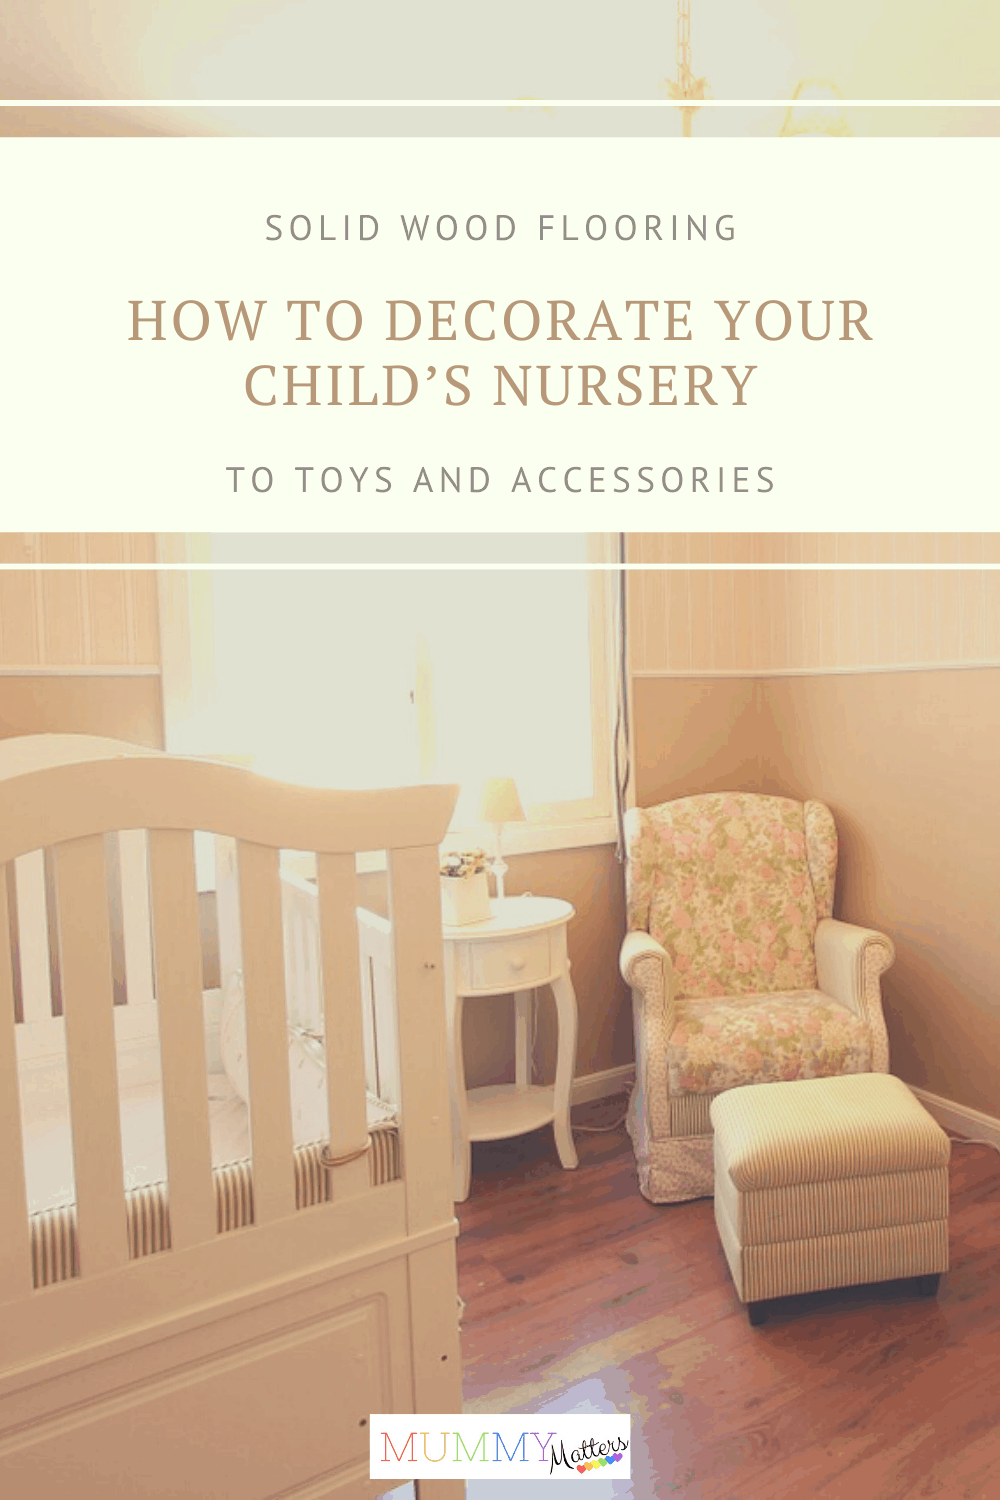 How to decorate a child's nursery